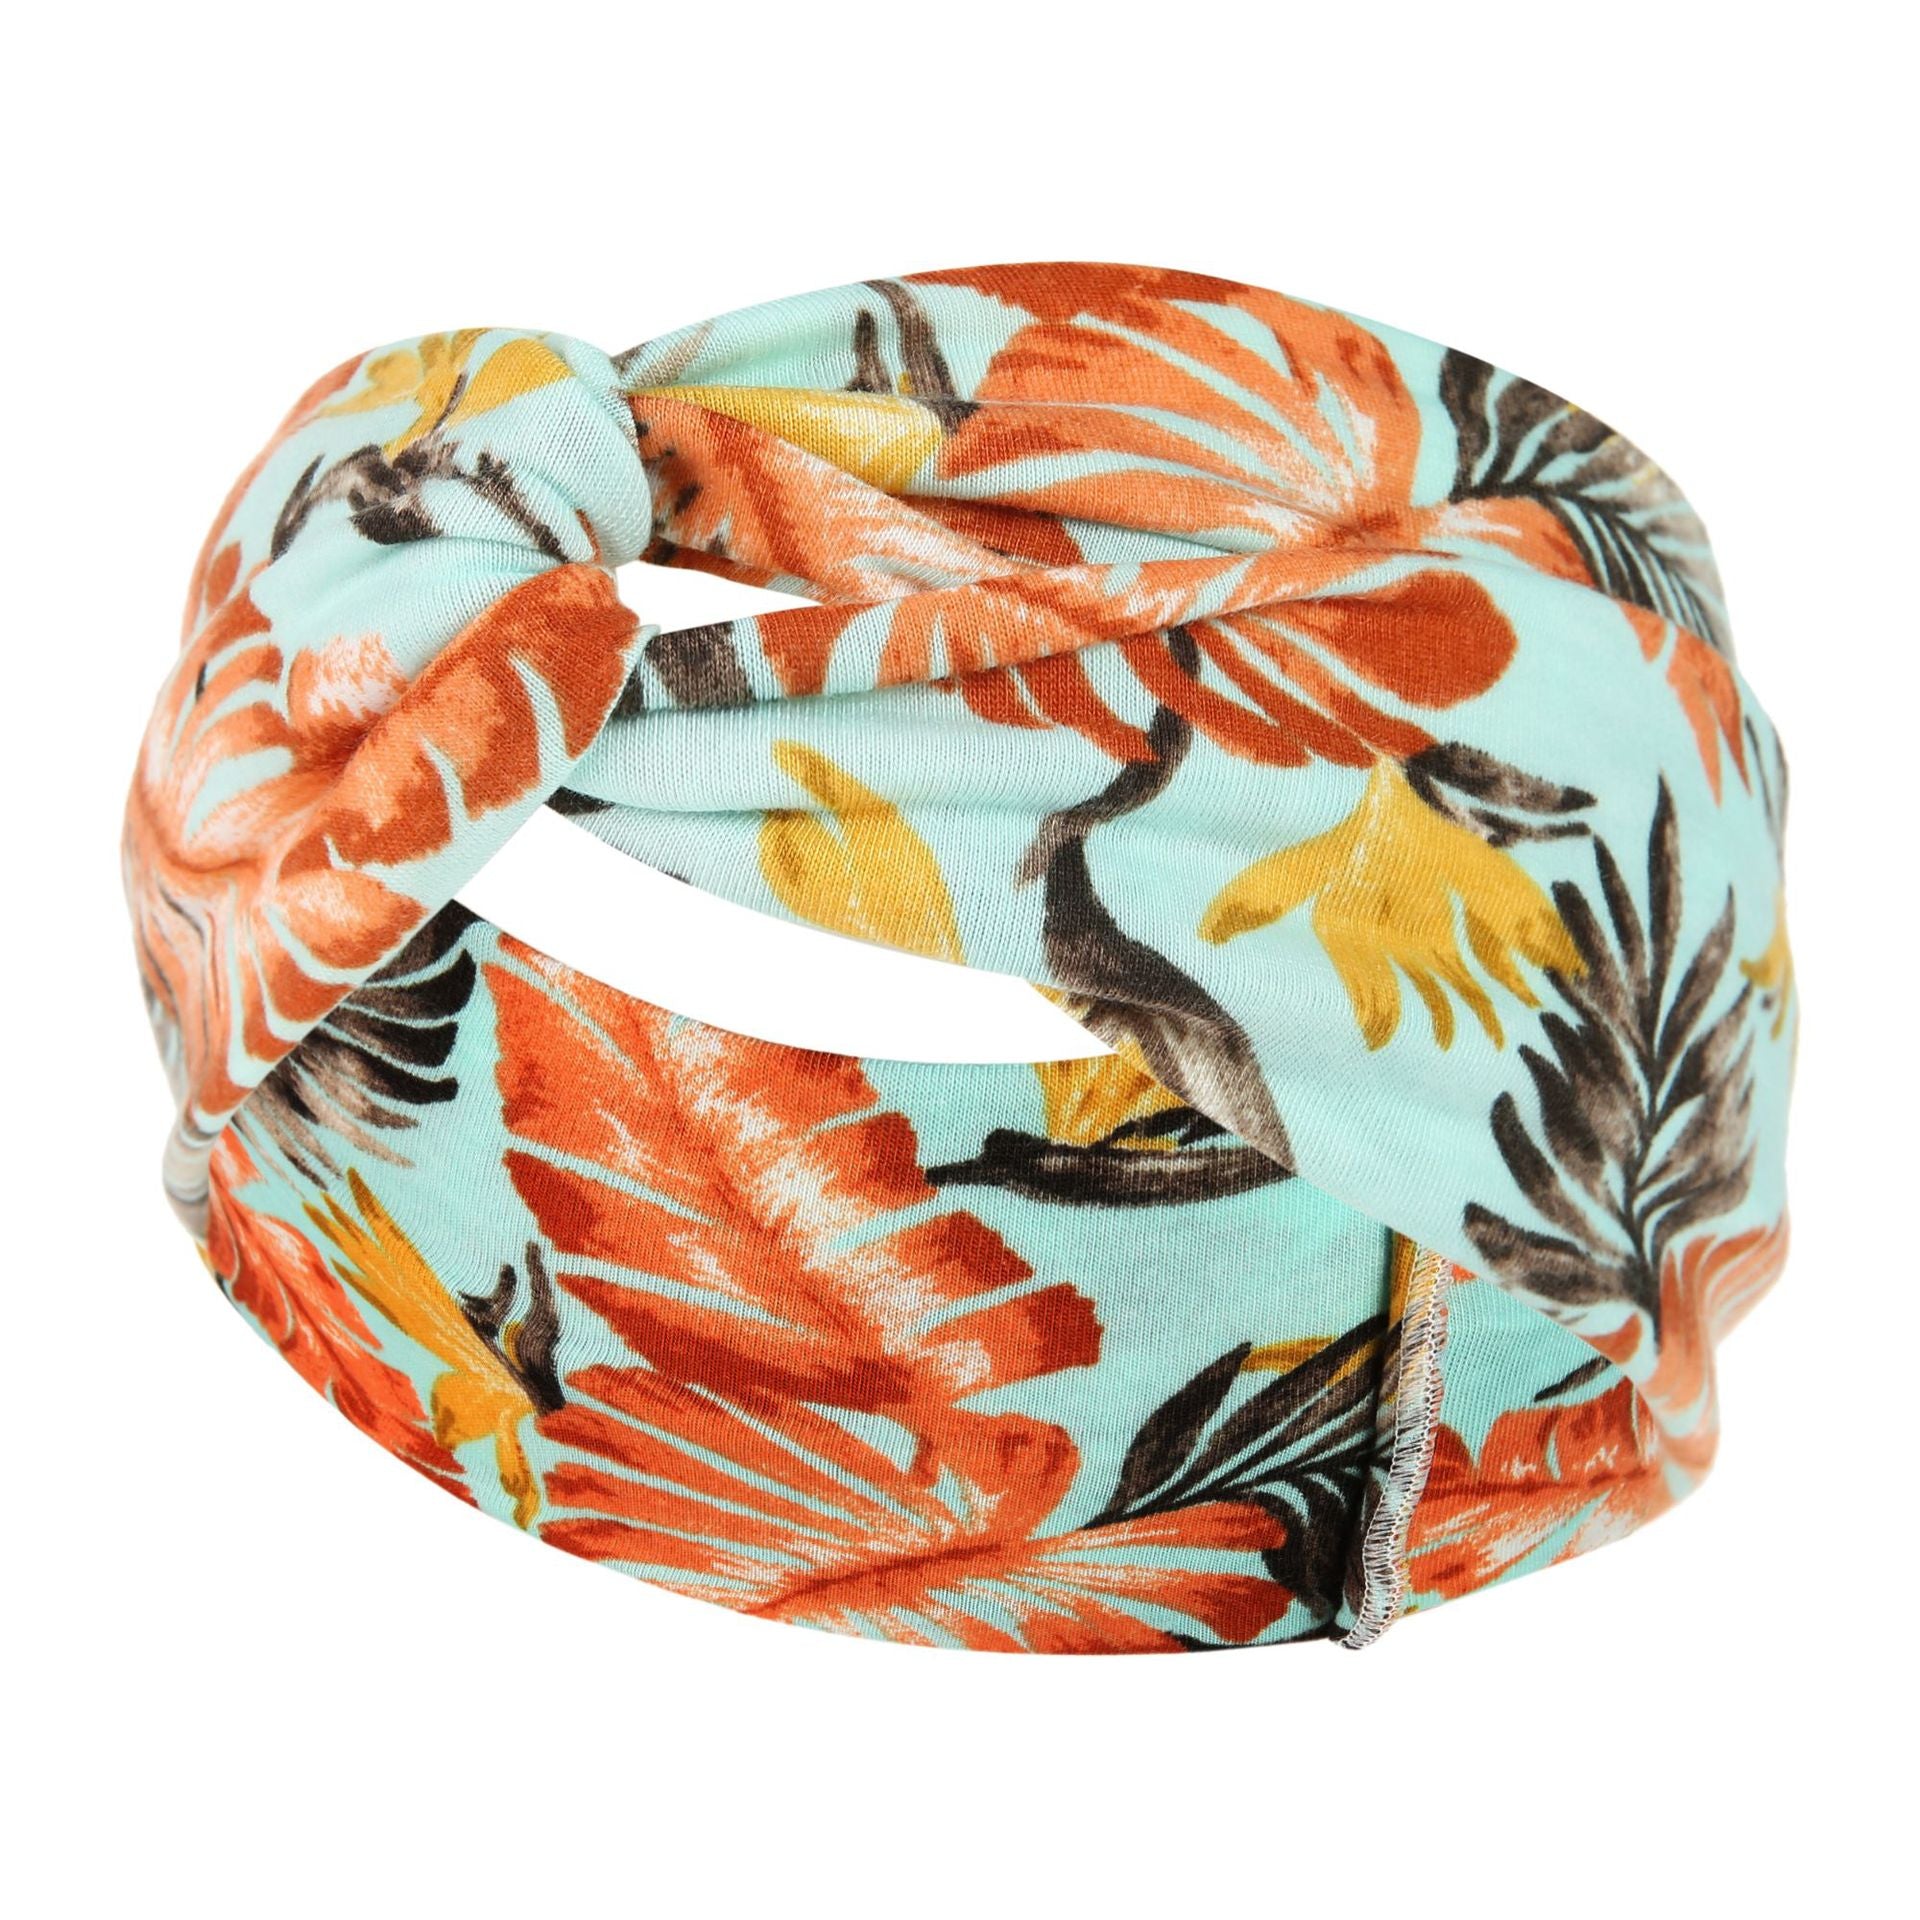 Women's Printed Knitted Wide-Brimmed Cross Headband